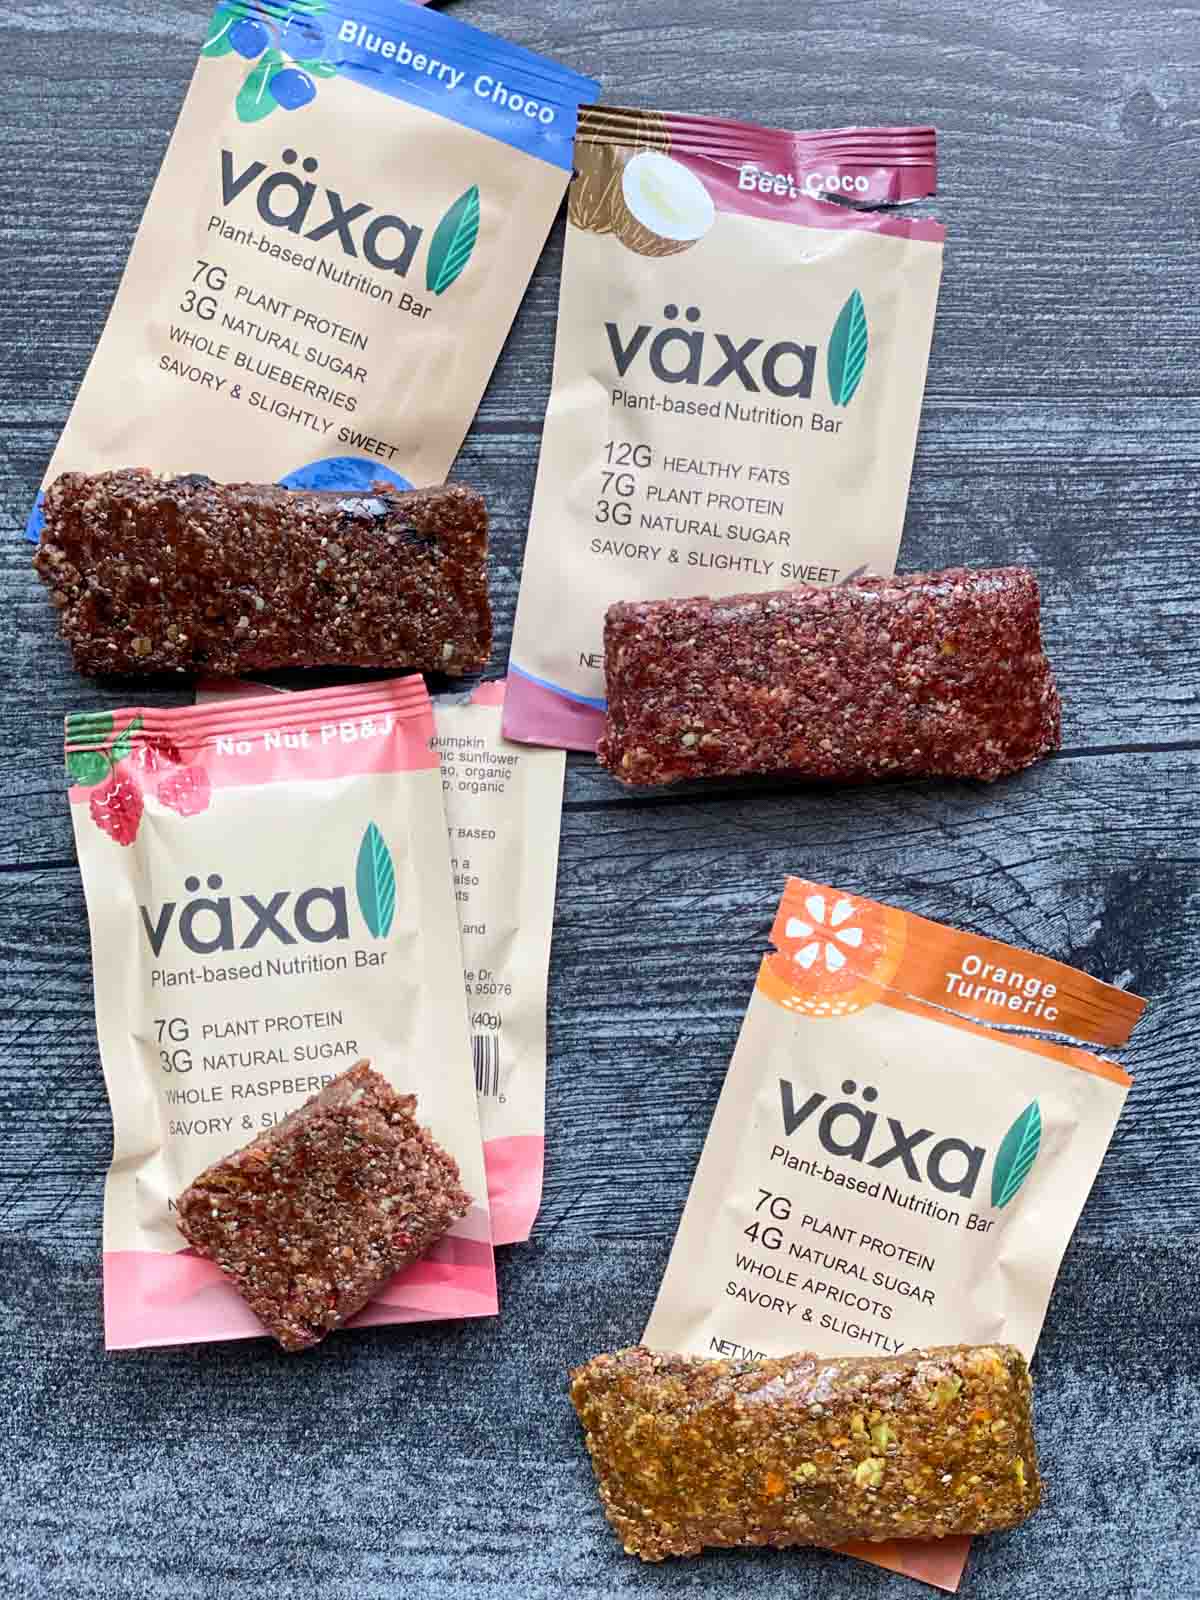 4 flavors of växa bars unwrapped next to their labels